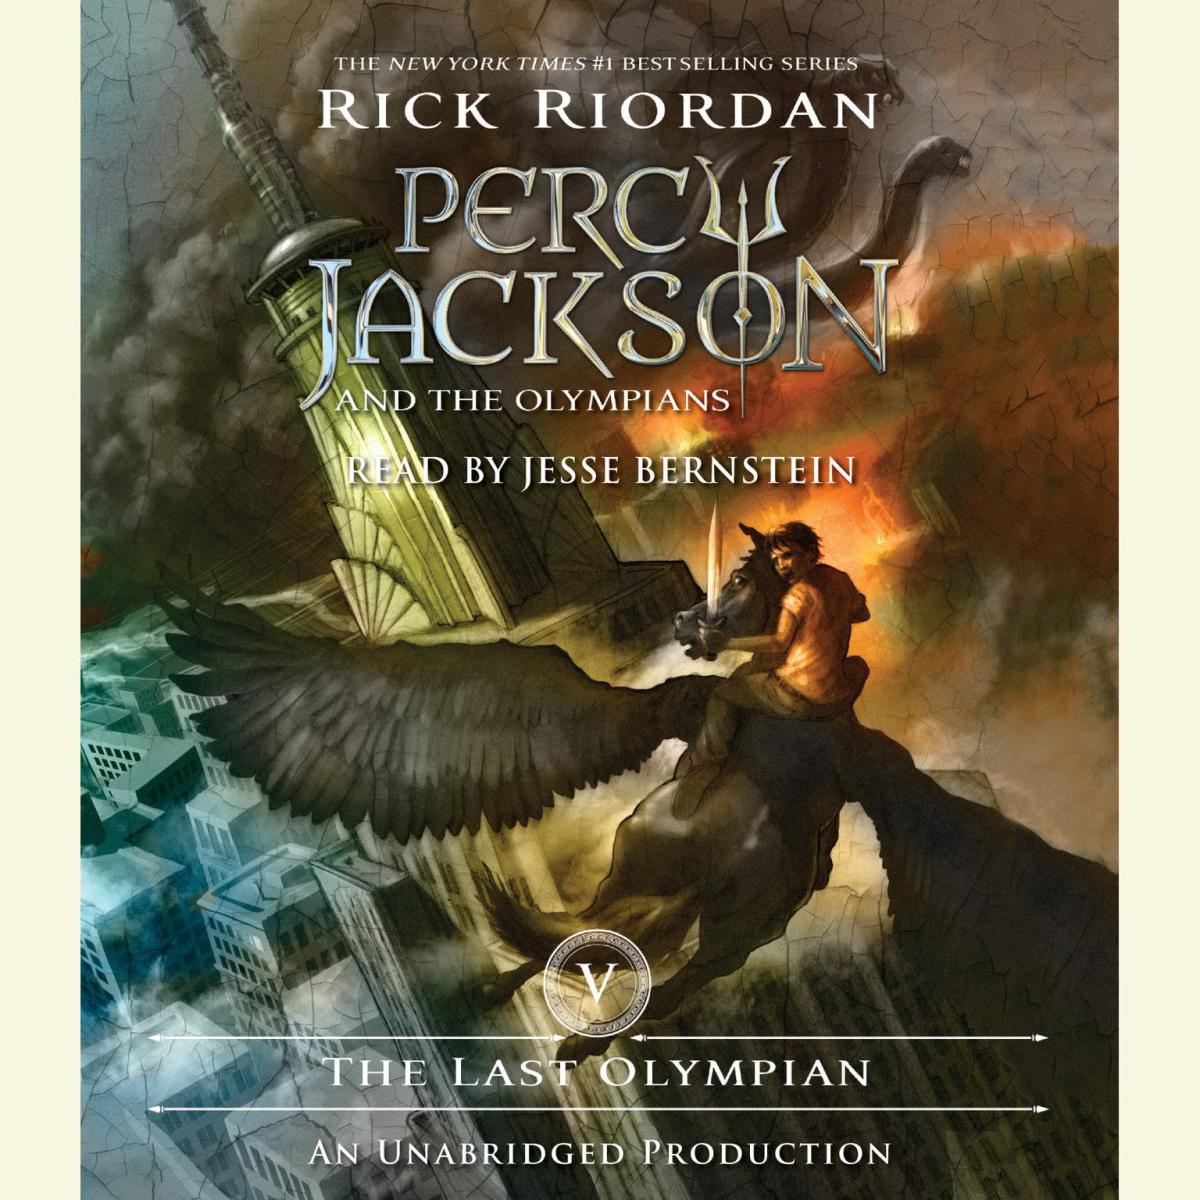 "Percy Jackson and the Olympians"